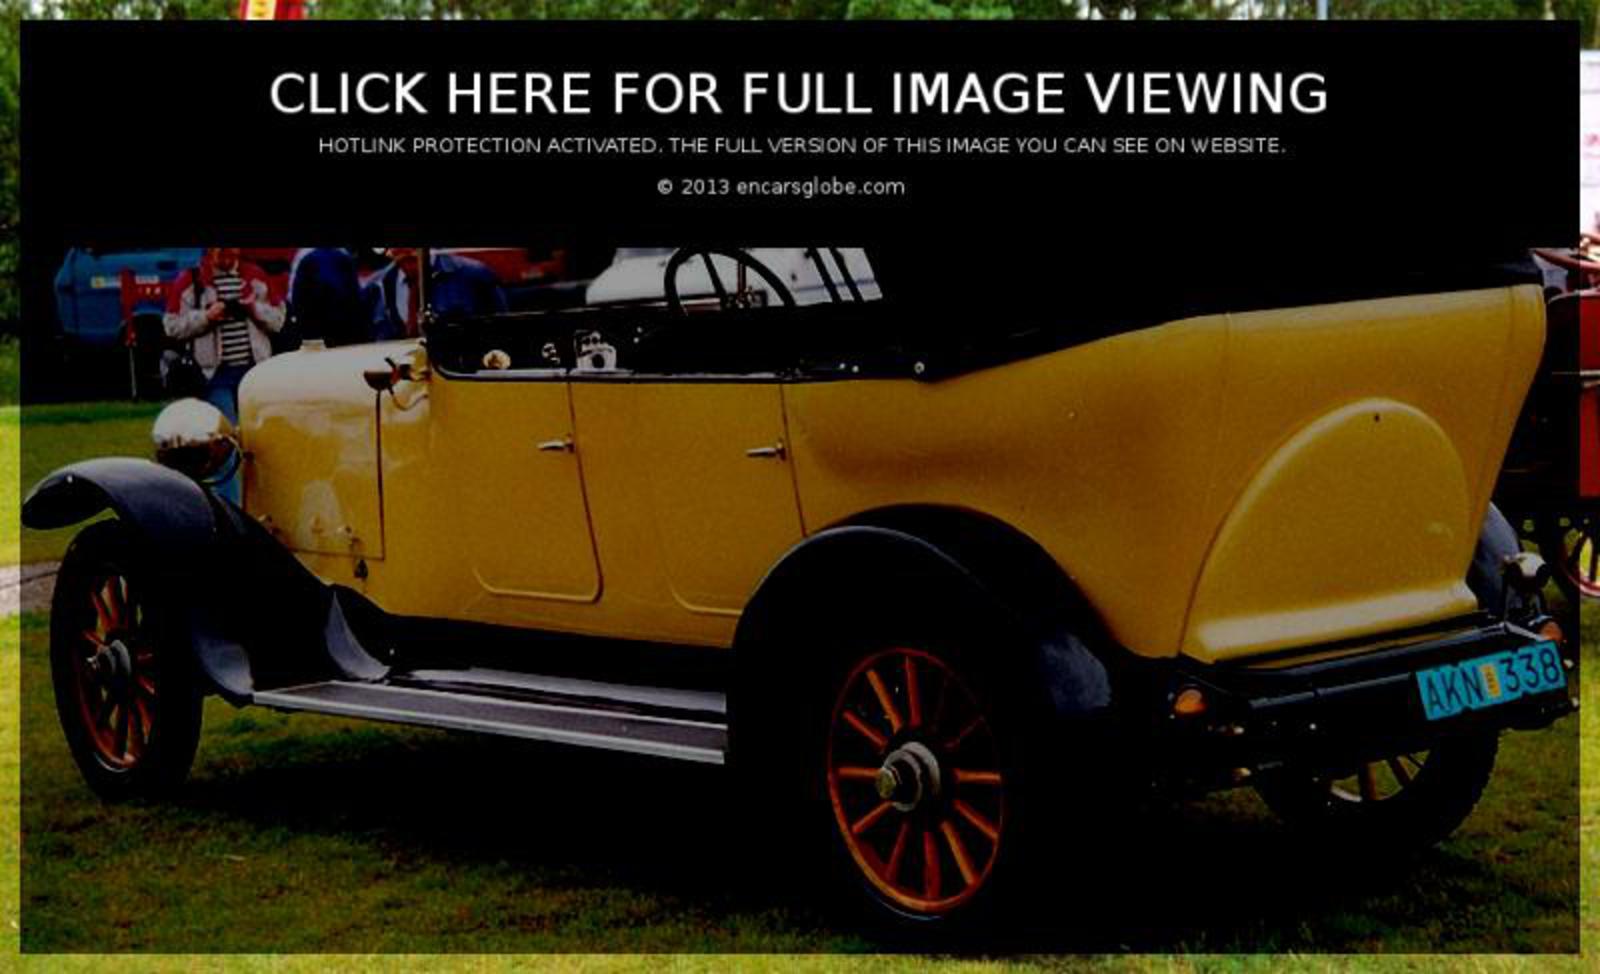 Austin Pearl Cabriolet Photo Gallery: Photo #07 out of 11, Image ...